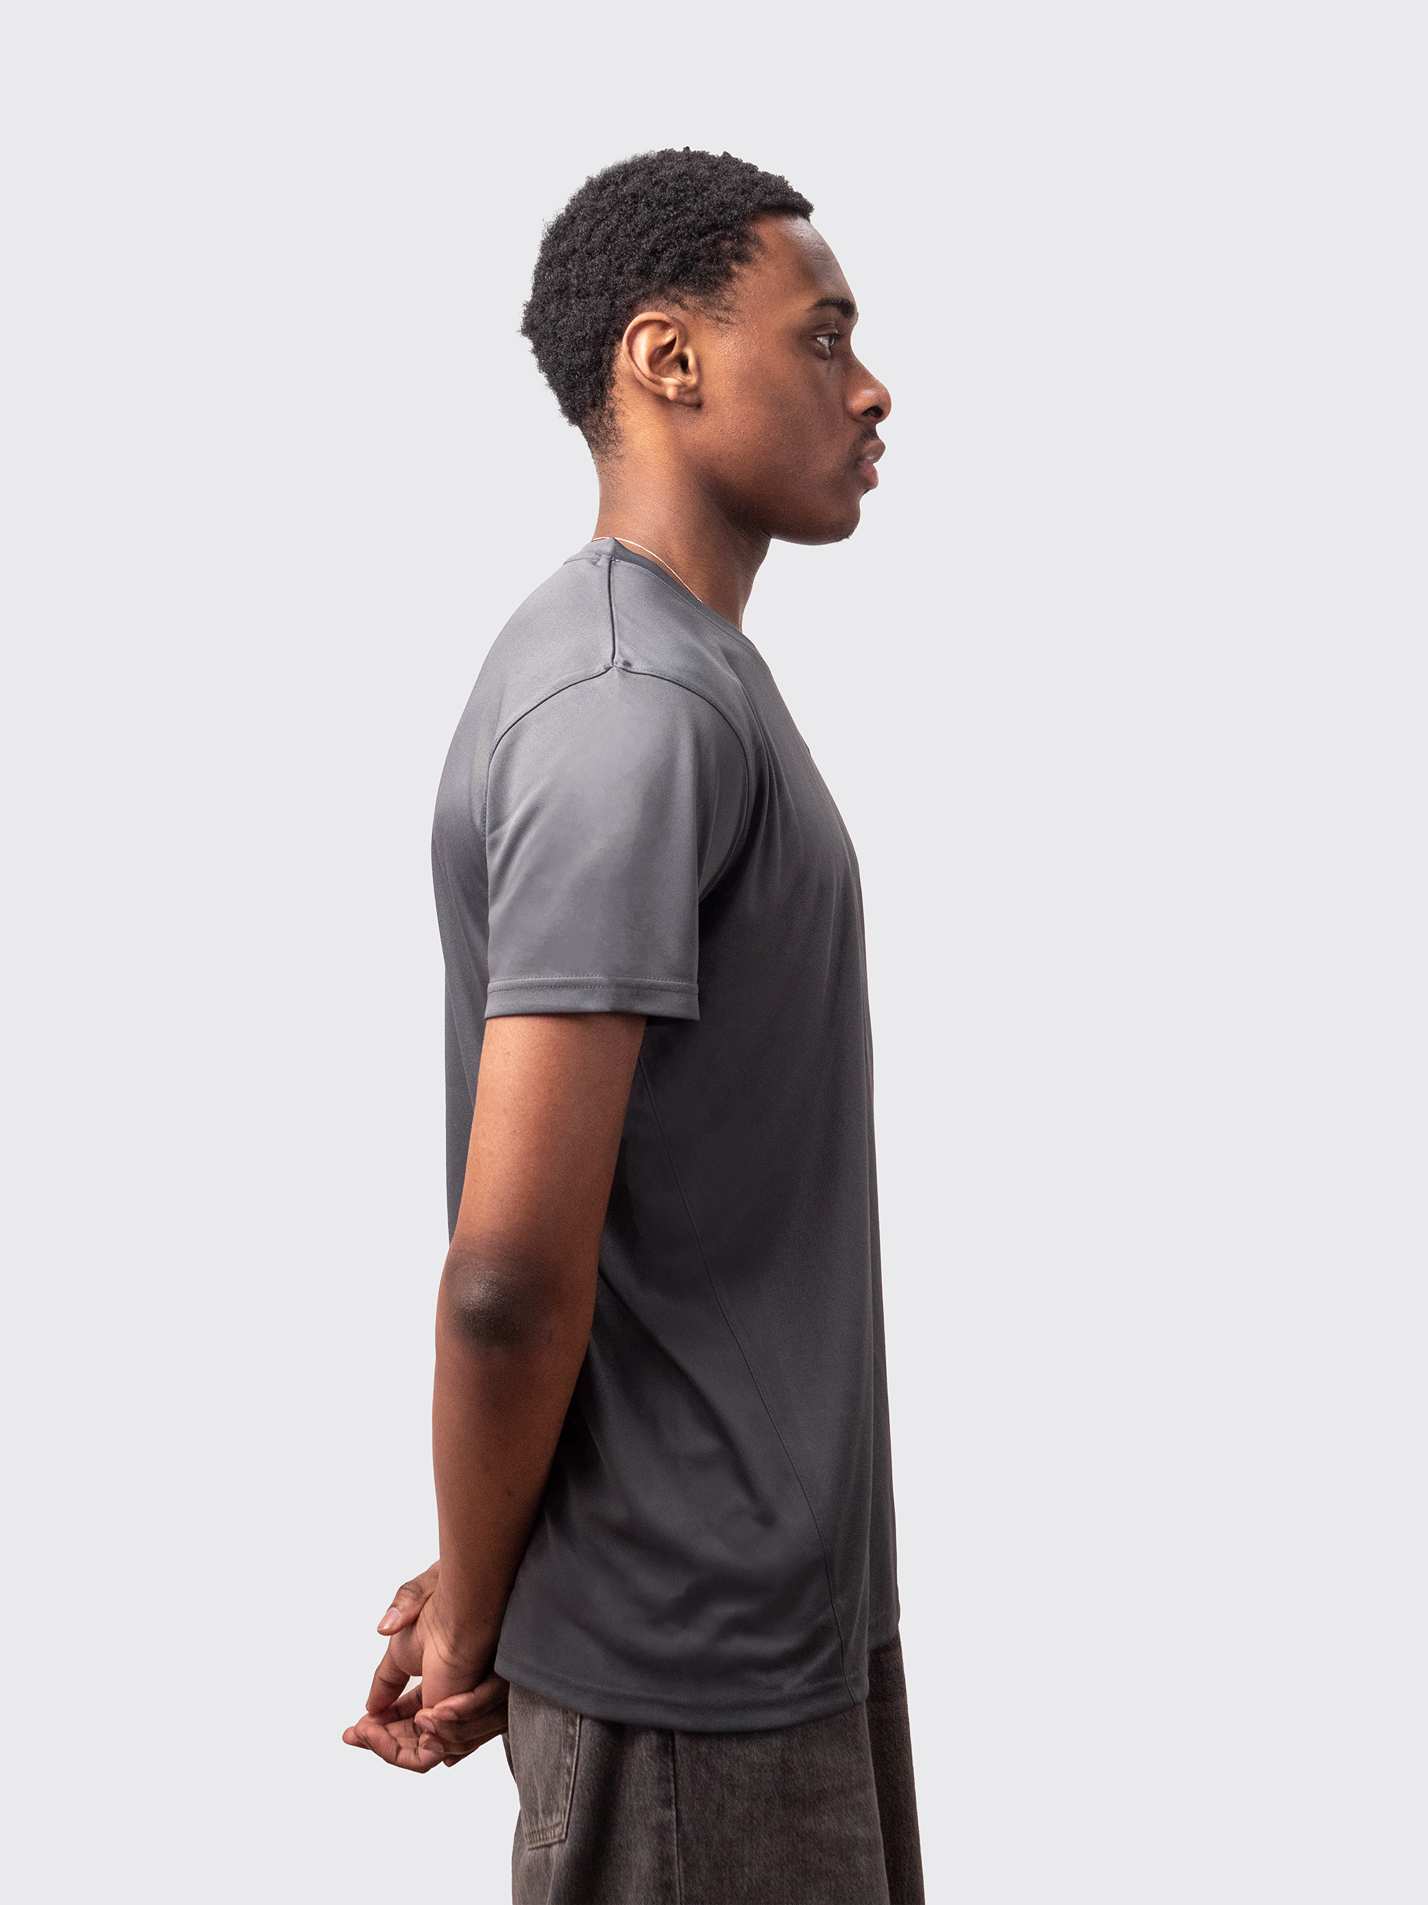 Charcoal performance t-shirt for athletics